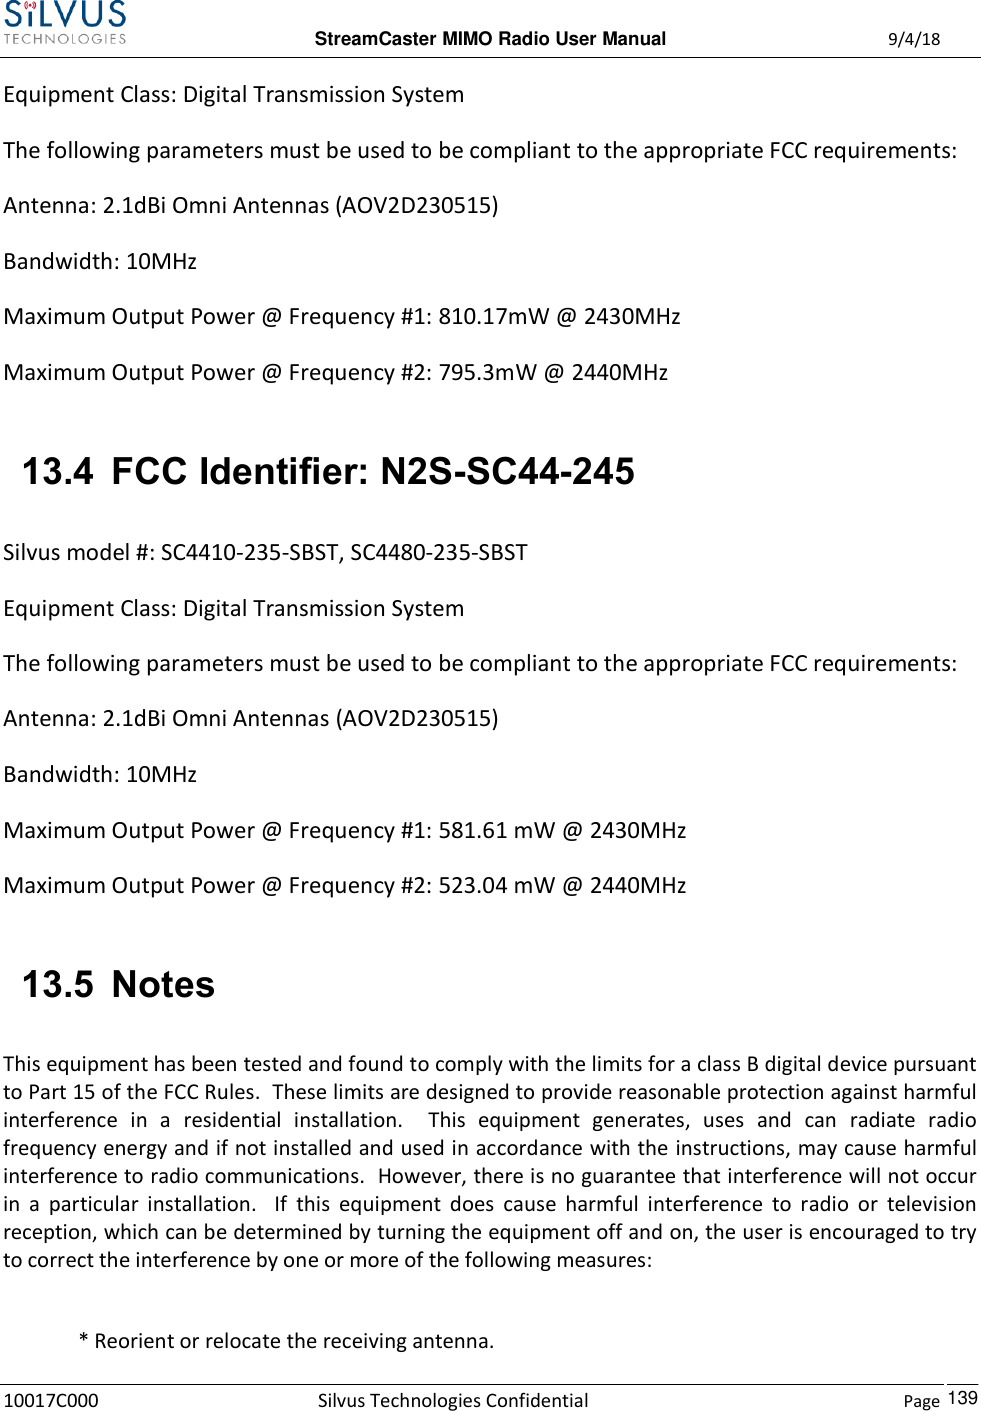  StreamCaster MIMO Radio User Manual  9/4/18 10017C000 Silvus Technologies Confidential    Page    139 Equipment Class: Digital Transmission System The following parameters must be used to be compliant to the appropriate FCC requirements:  Antenna: 2.1dBi Omni Antennas (AOV2D230515) Bandwidth: 10MHz Maximum Output Power @ Frequency #1: 810.17mW @ 2430MHz Maximum Output Power @ Frequency #2: 795.3mW @ 2440MHz  13.4 FCC Identifier: N2S-SC44-245 Silvus model #: SC4410-235-SBST, SC4480-235-SBST Equipment Class: Digital Transmission System The following parameters must be used to be compliant to the appropriate FCC requirements:  Antenna: 2.1dBi Omni Antennas (AOV2D230515) Bandwidth: 10MHz Maximum Output Power @ Frequency #1: 581.61 mW @ 2430MHz Maximum Output Power @ Frequency #2: 523.04 mW @ 2440MHz  13.5 Notes This equipment has been tested and found to comply with the limits for a class B digital device pursuant to Part 15 of the FCC Rules.  These limits are designed to provide reasonable protection against harmful interference  in  a  residential  installation.    This  equipment  generates,  uses  and  can  radiate  radio frequency energy and if not installed and used in accordance with the instructions, may cause harmful interference to radio communications.  However, there is no guarantee that interference will not occur in  a  particular  installation.    If  this  equipment  does  cause  harmful  interference  to  radio  or  television reception, which can be determined by turning the equipment off and on, the user is encouraged to try to correct the interference by one or more of the following measures:  * Reorient or relocate the receiving antenna. 